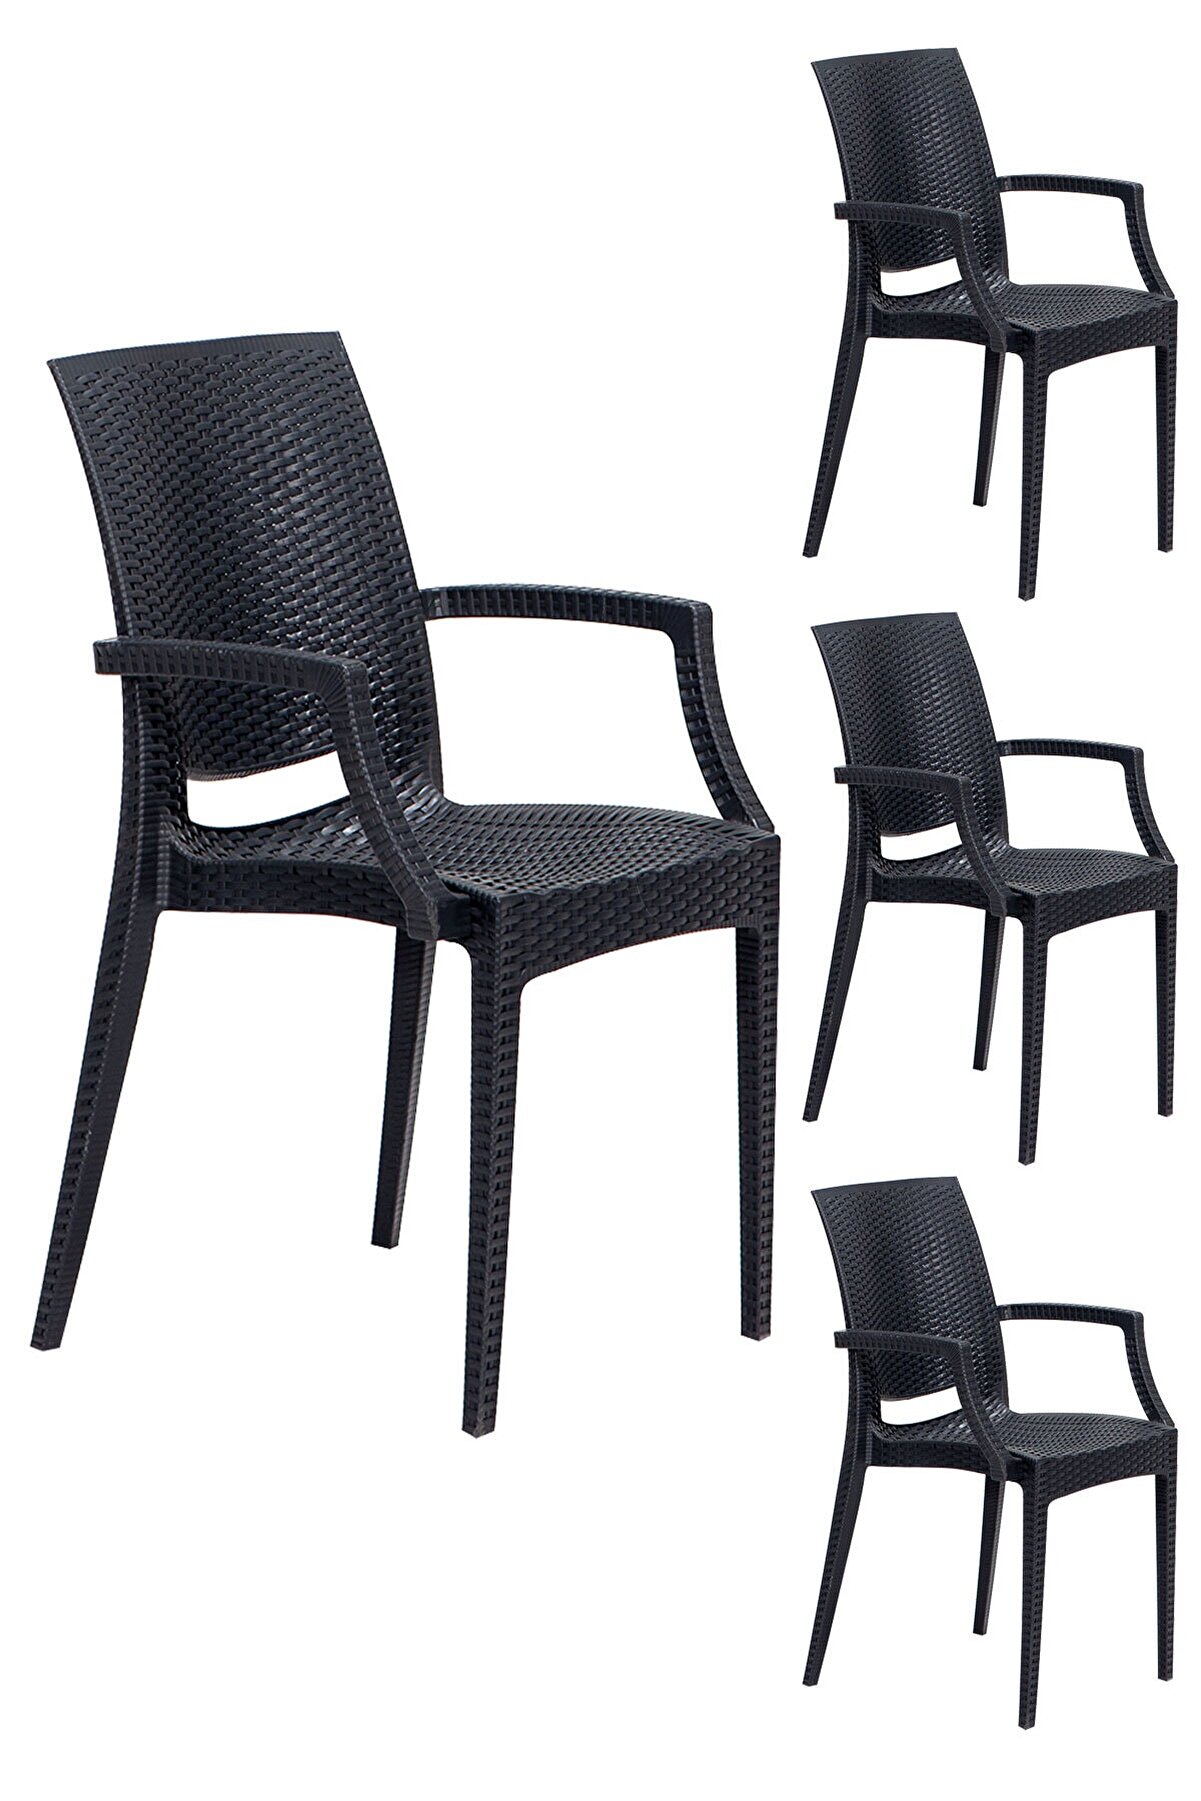 4 Pcs. Rattan Lux Anthracite Chairs / Balcony-Garden-Terrace